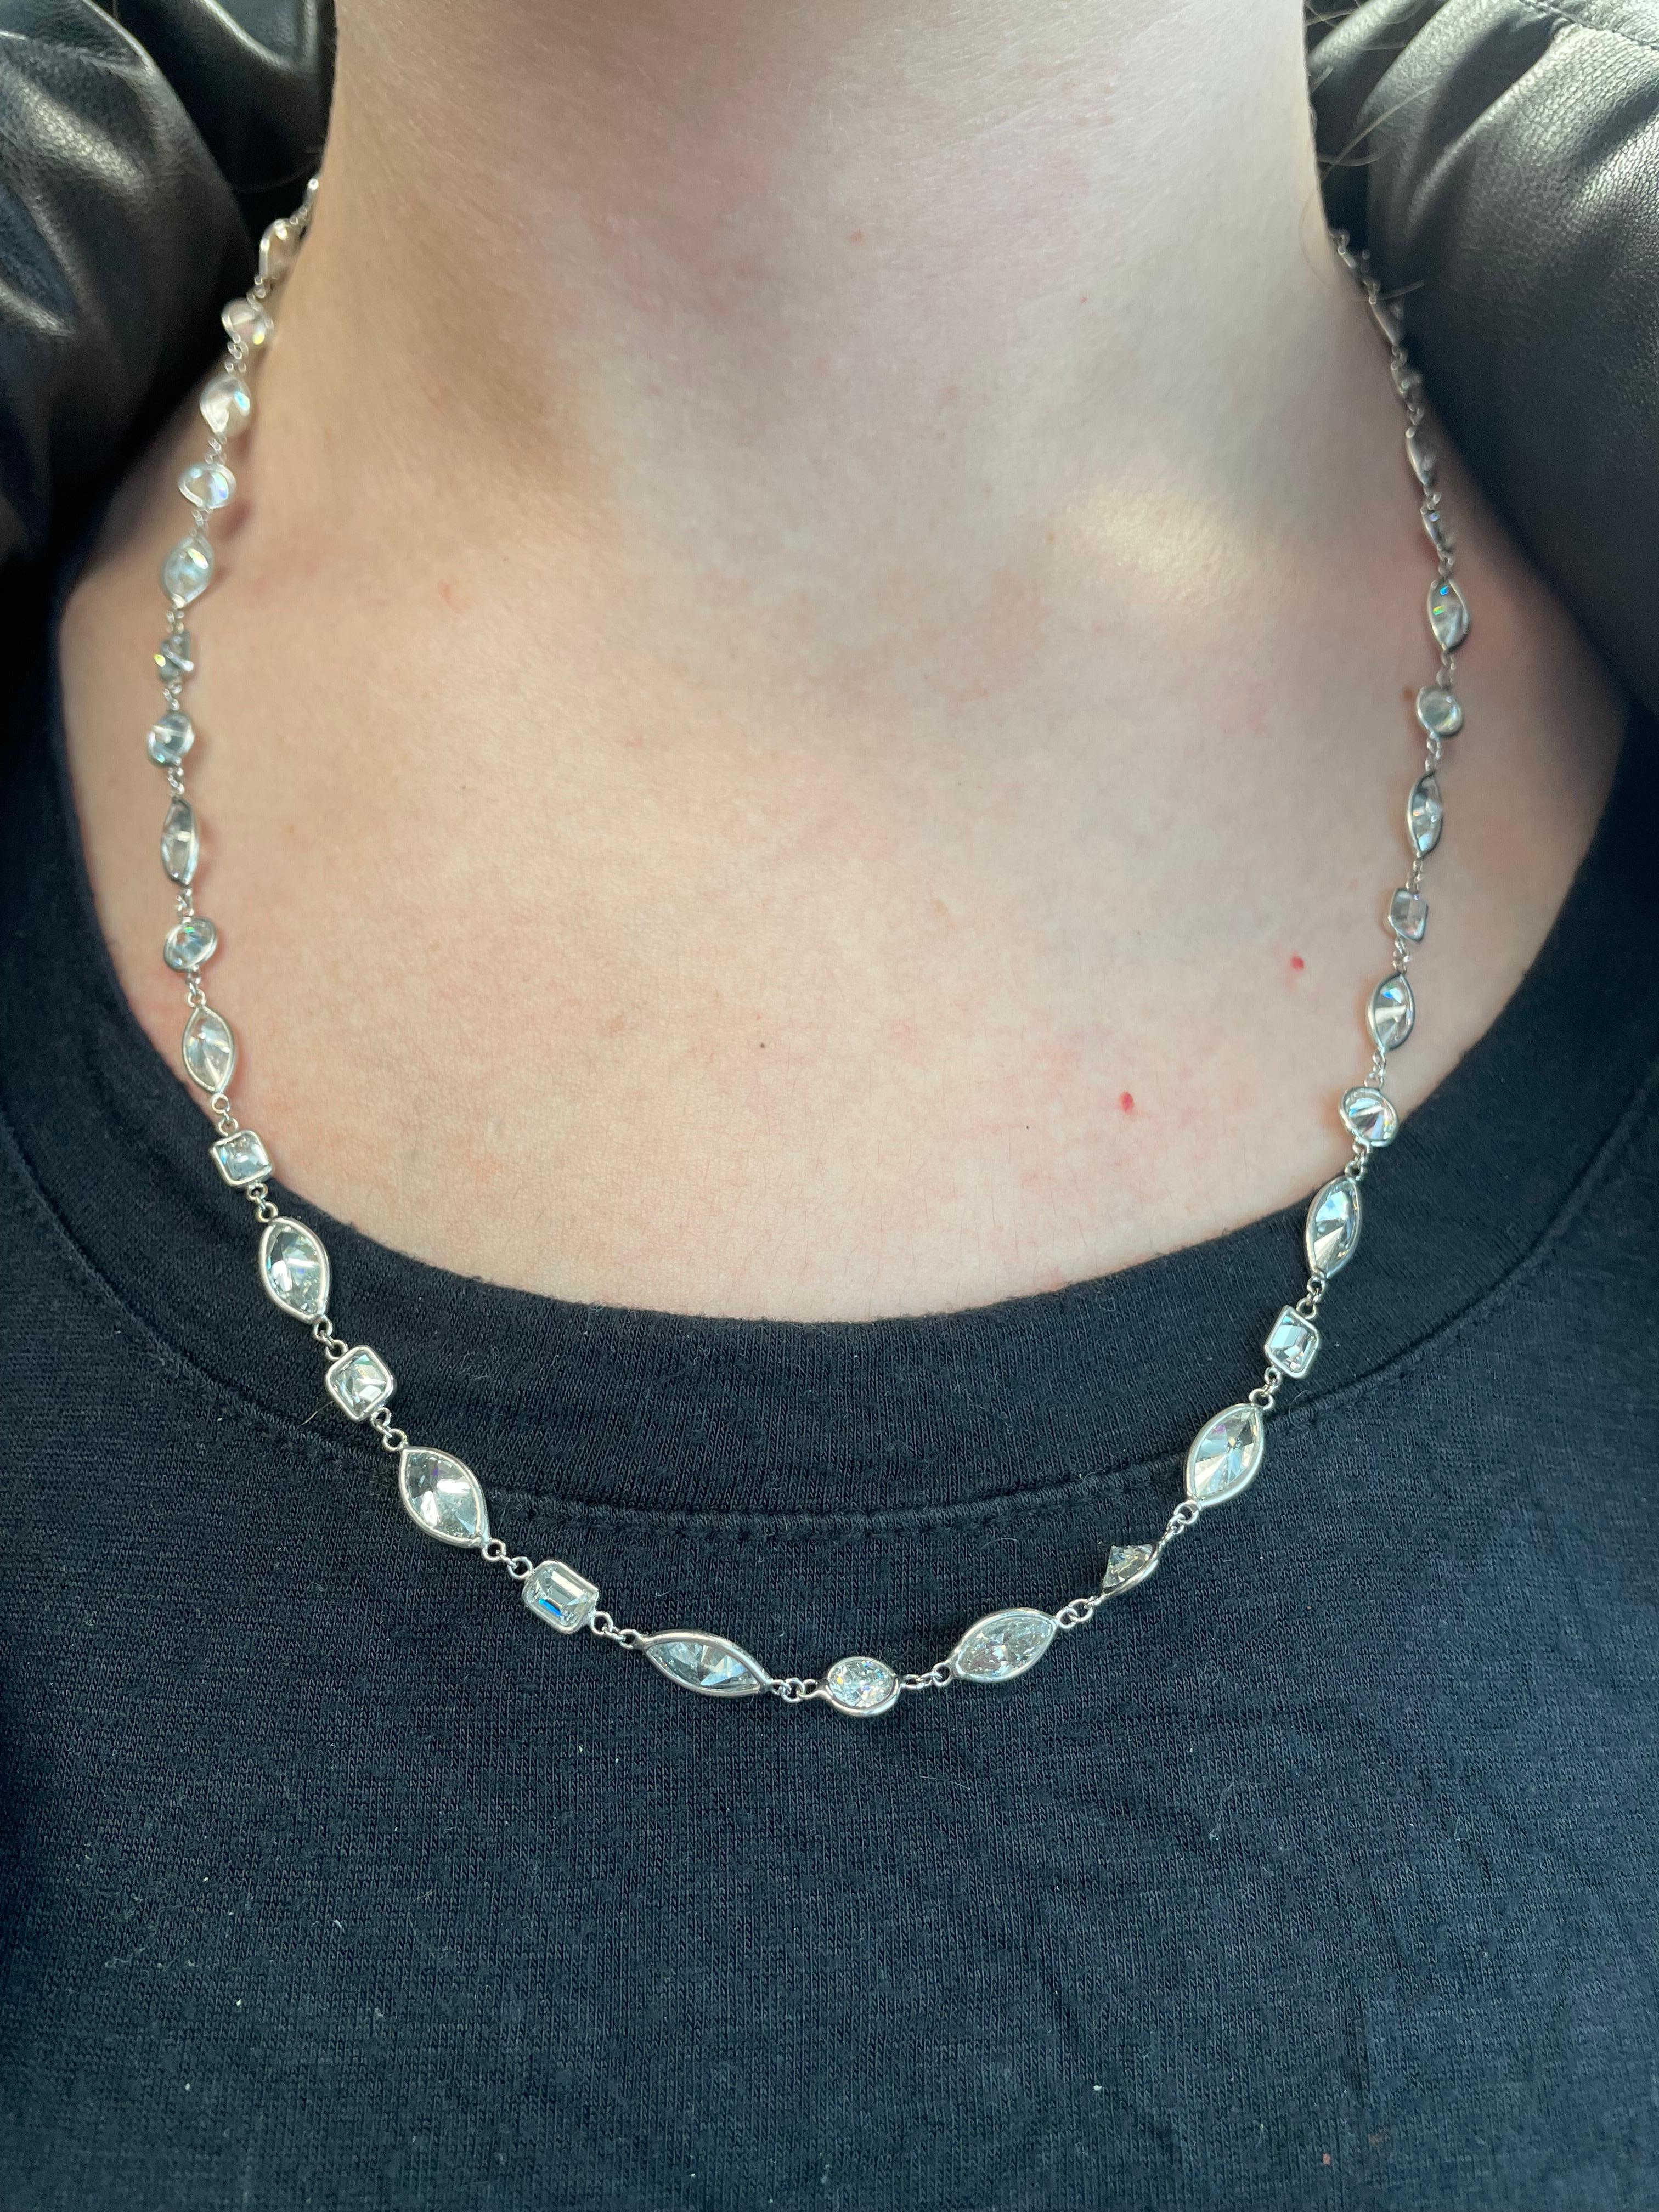 Exquisite multi diamonds by the yard modern necklace. By Alexander Beverly Hills.
22 marquise cut diamonds each stone averaging 0.75ct, 16.68 carats total. Approximately G/H color and SI clarity. 15 round brilliant diamonds each stone averaging